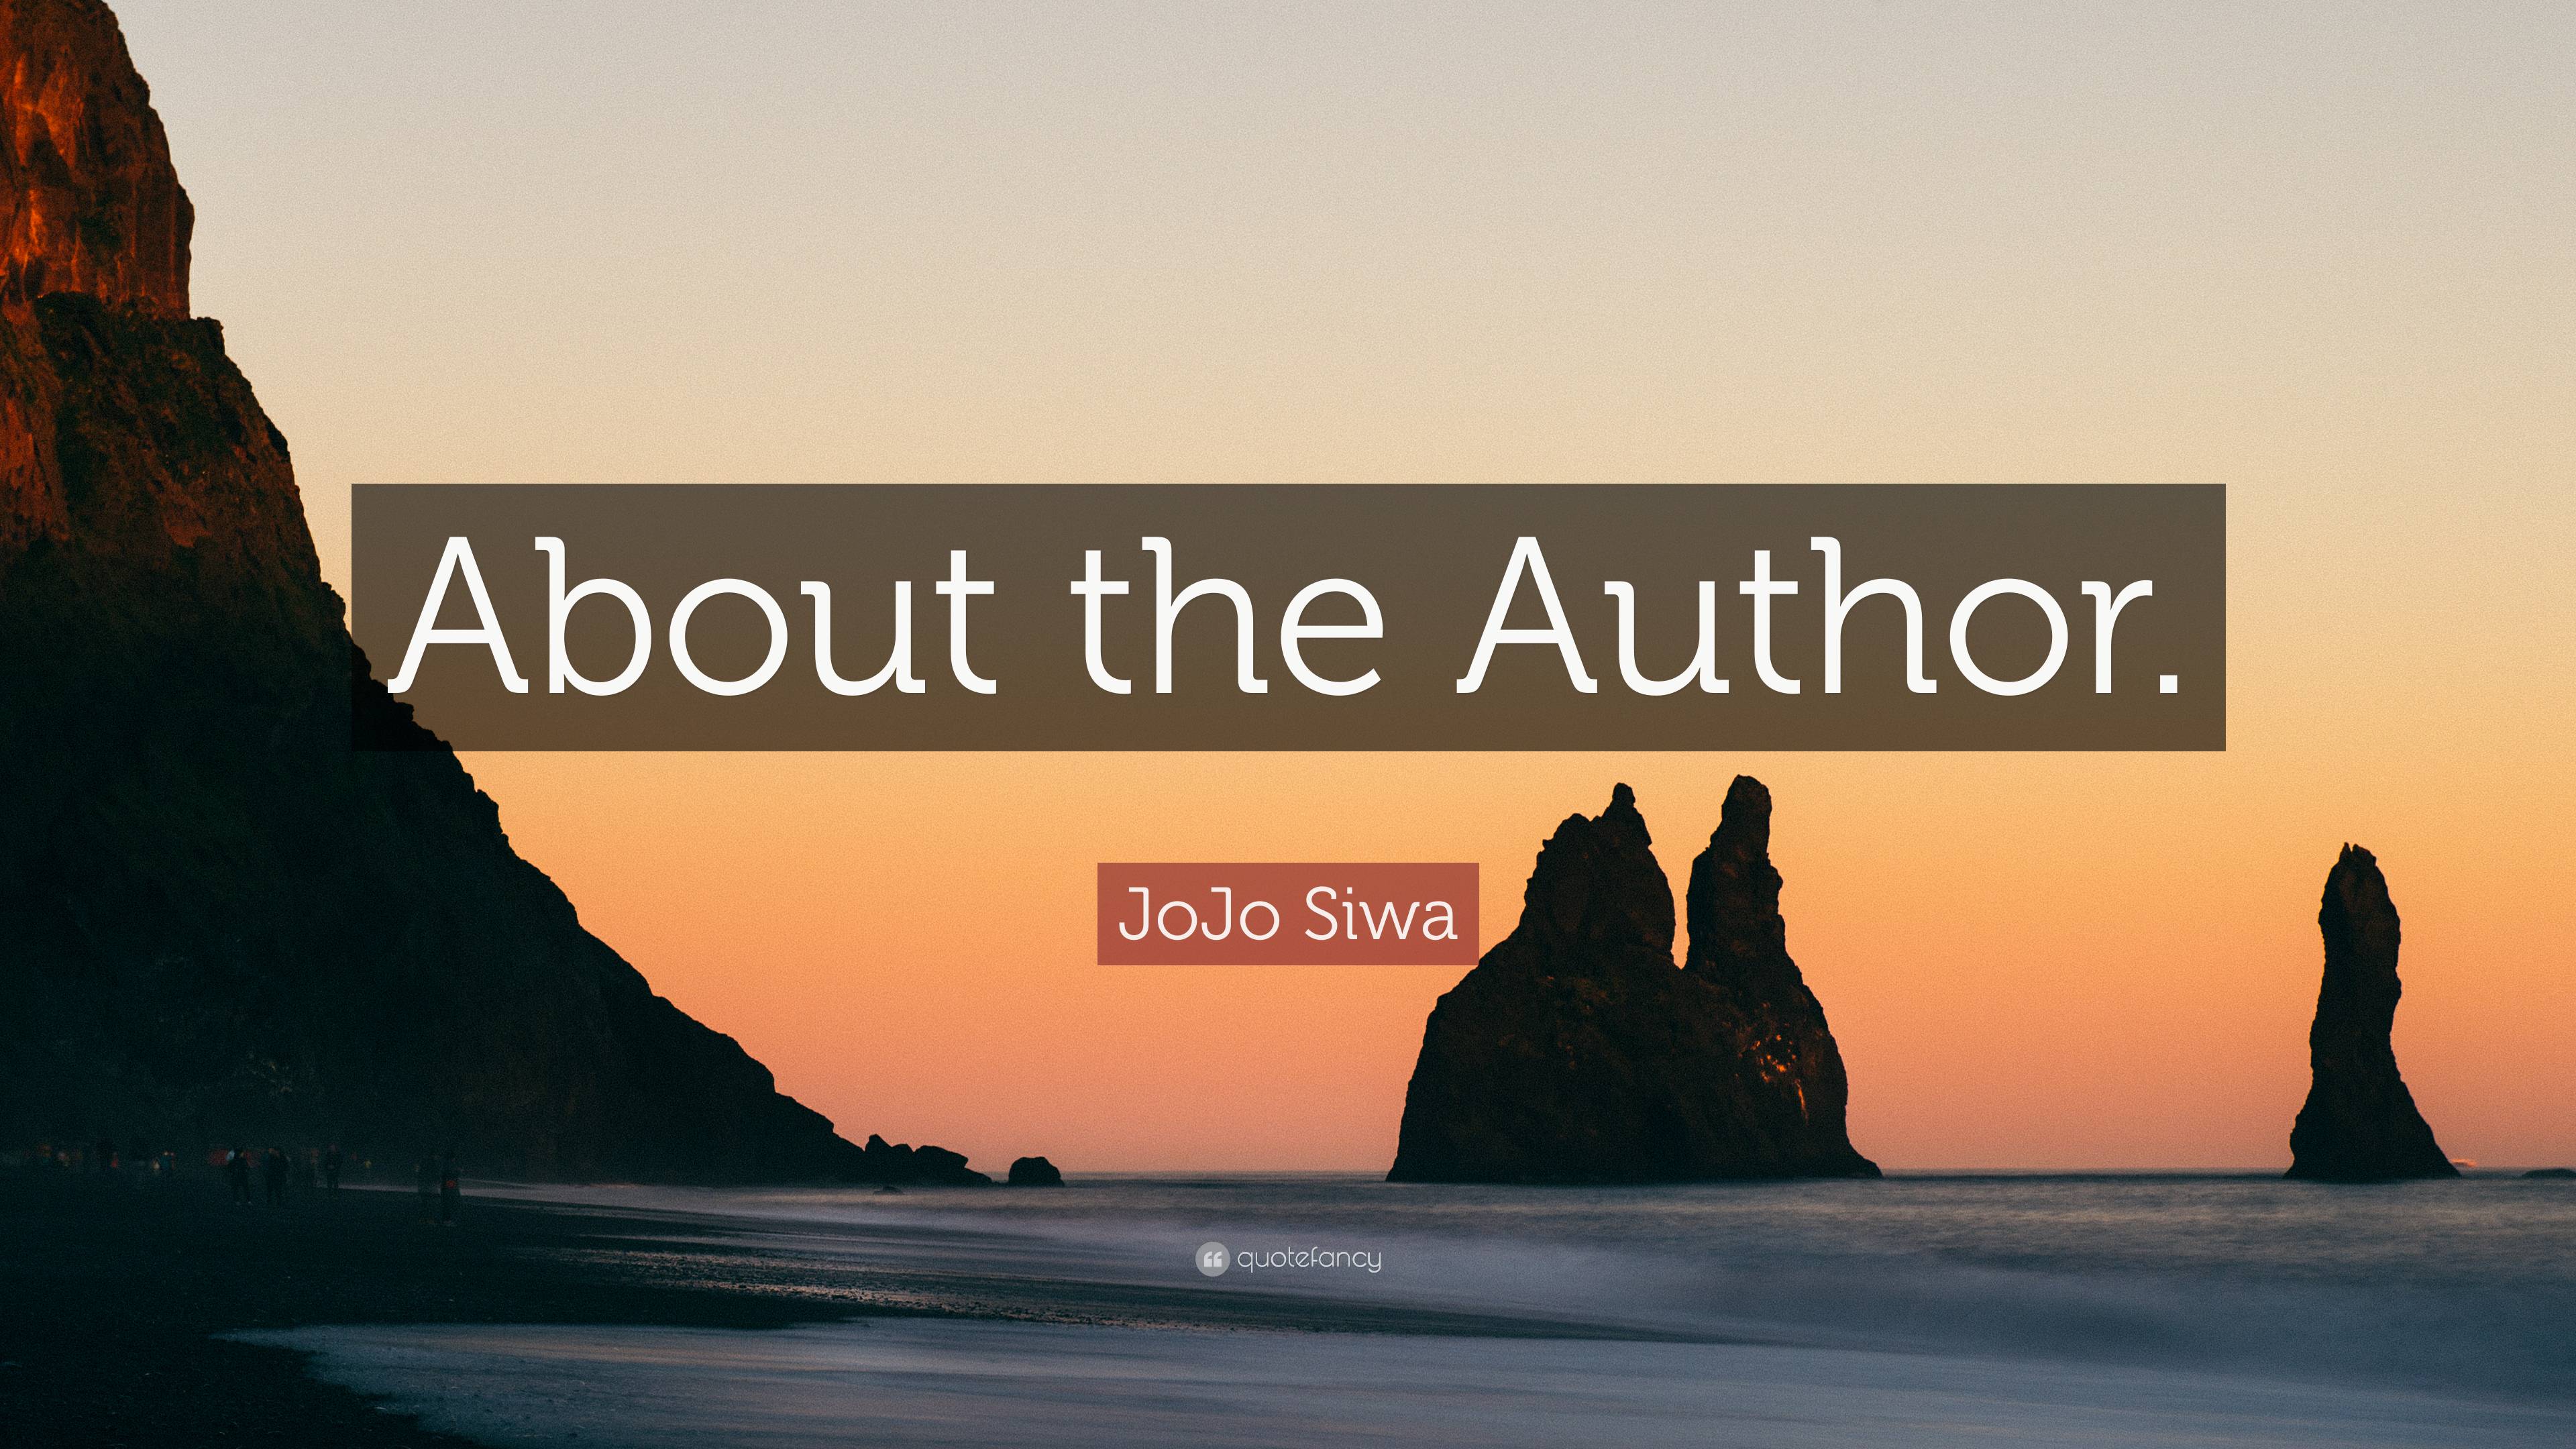 JoJo Siwa Quote: “About the Author.”